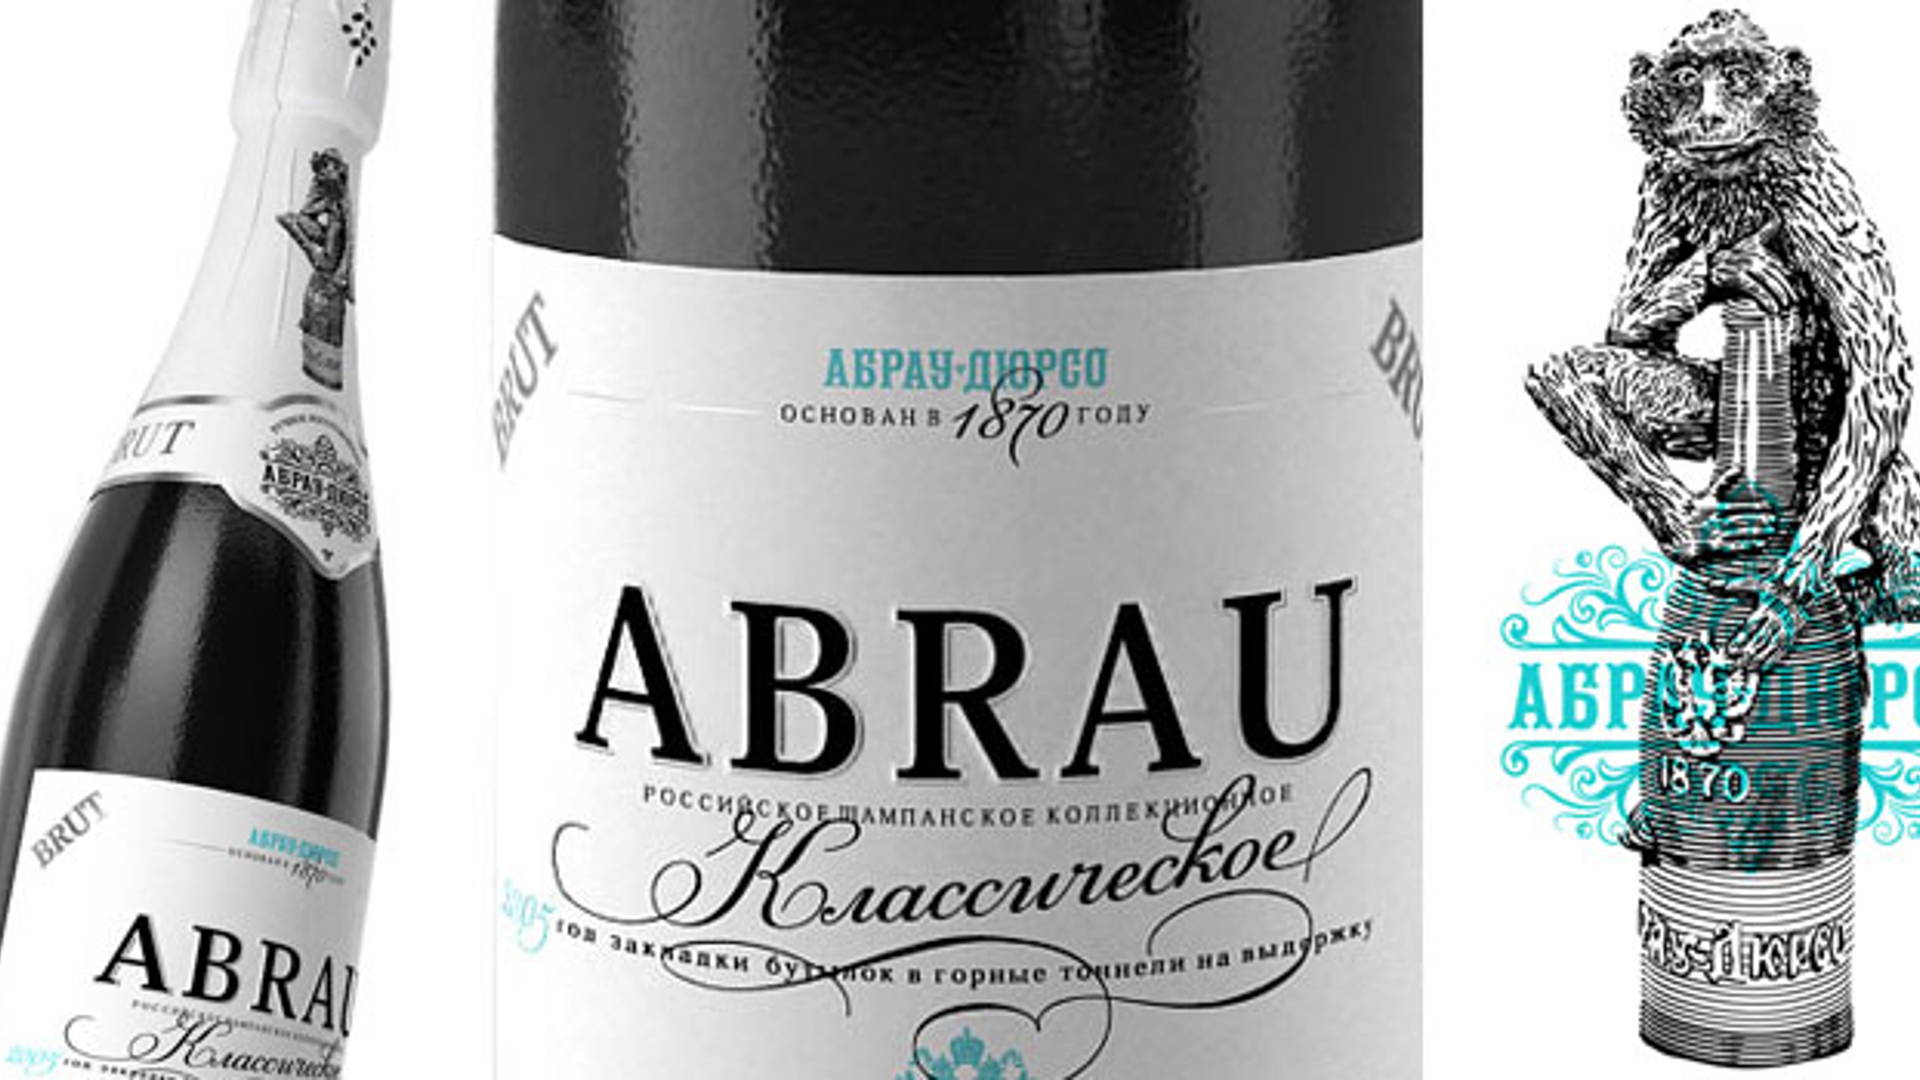 Featured image for Abrau Sparkling Wine